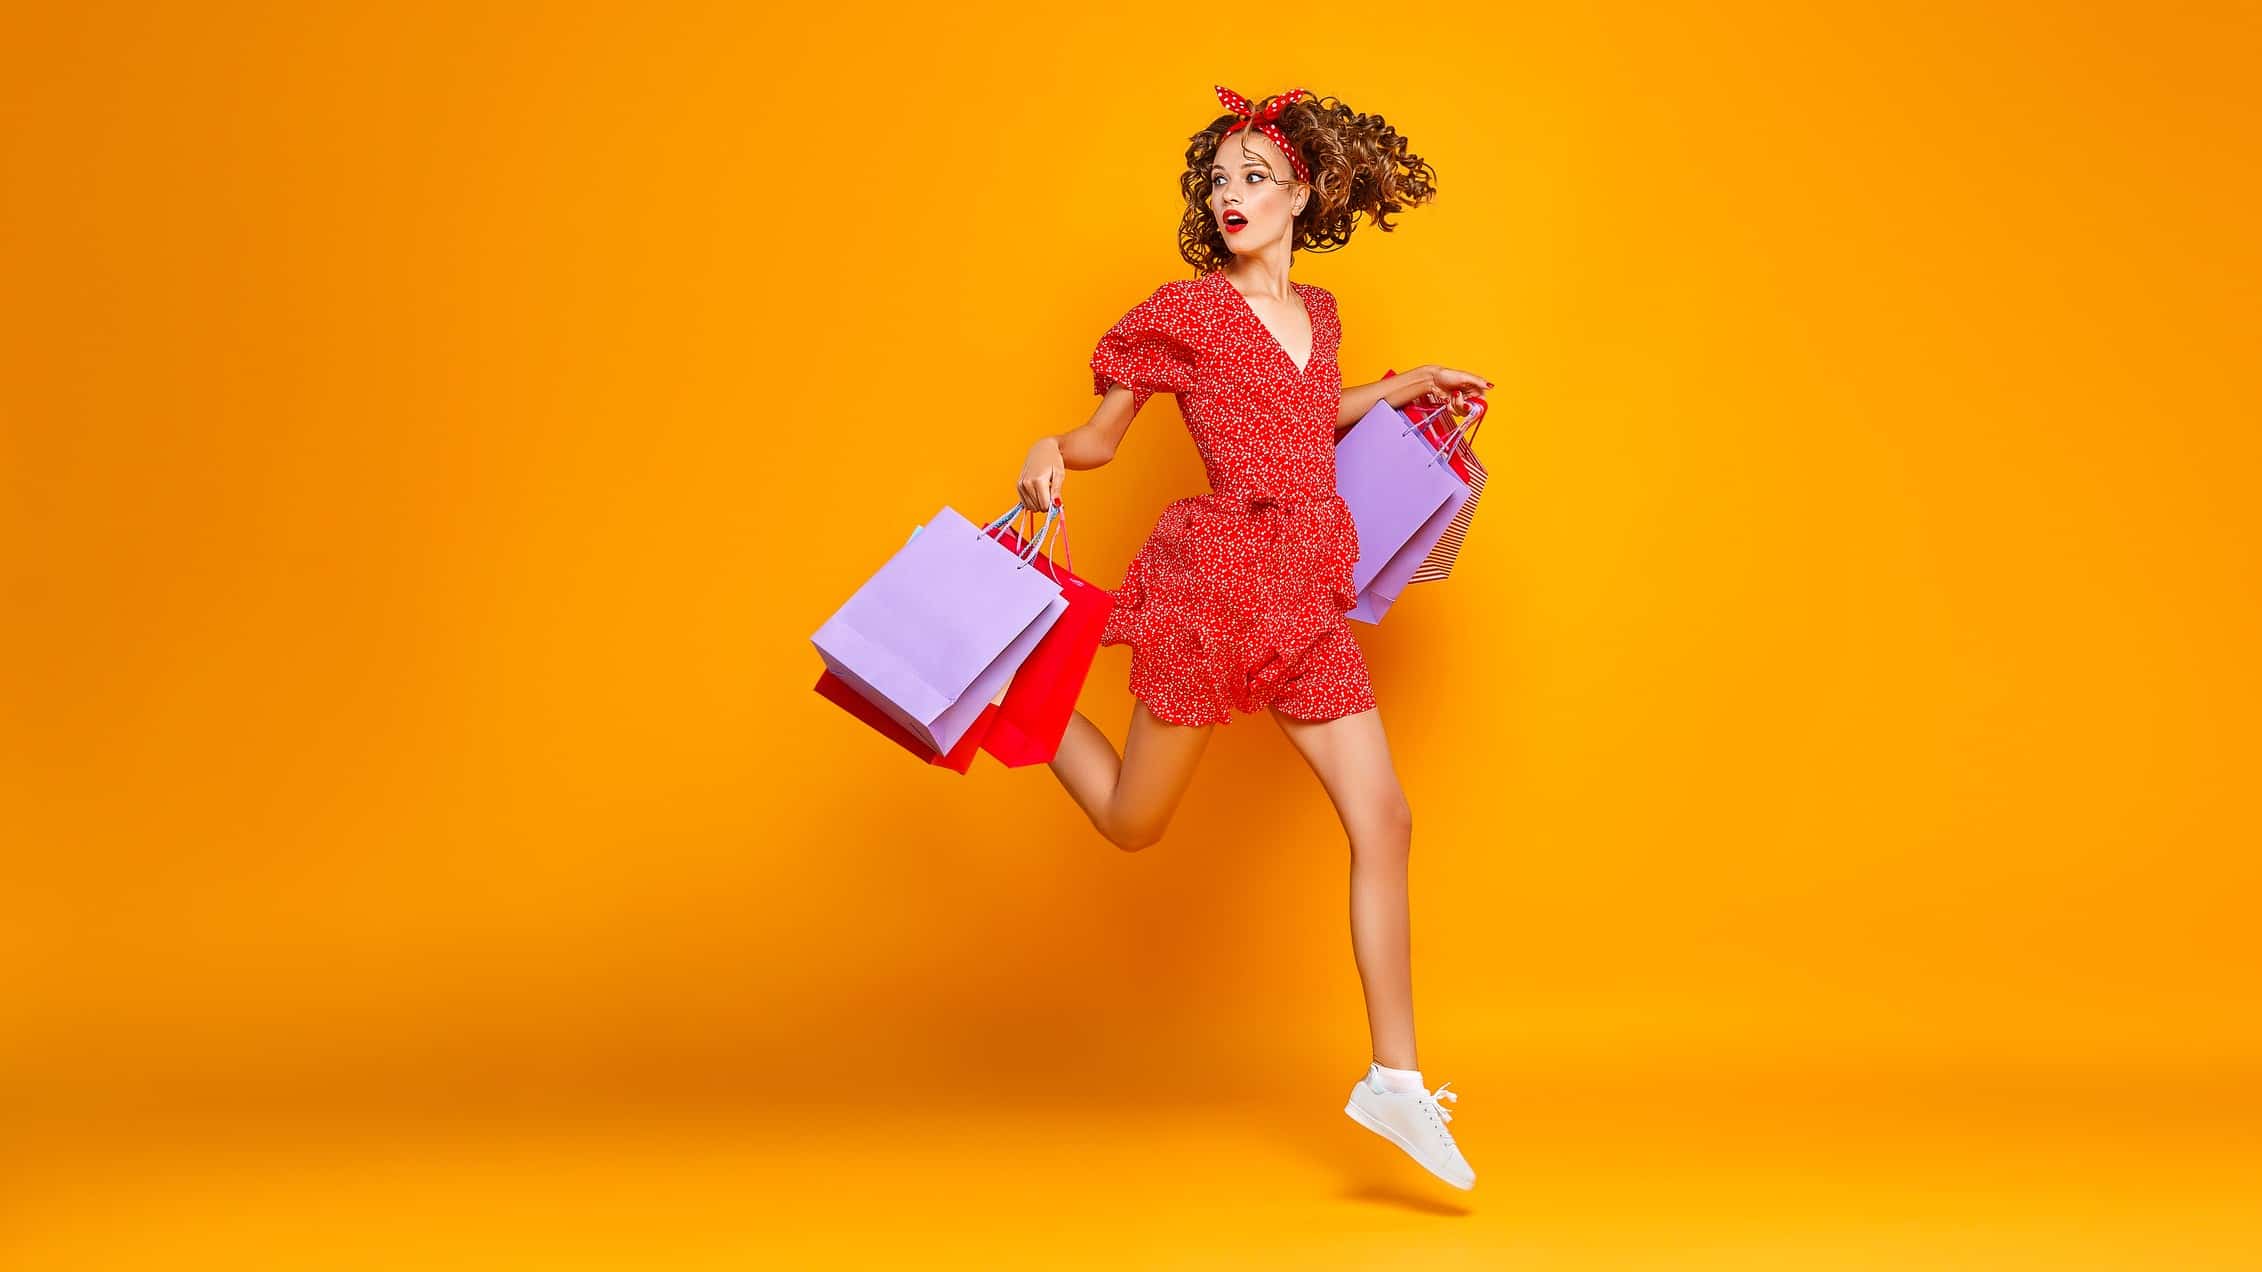 woman excitedly holding shopping bags and jumping